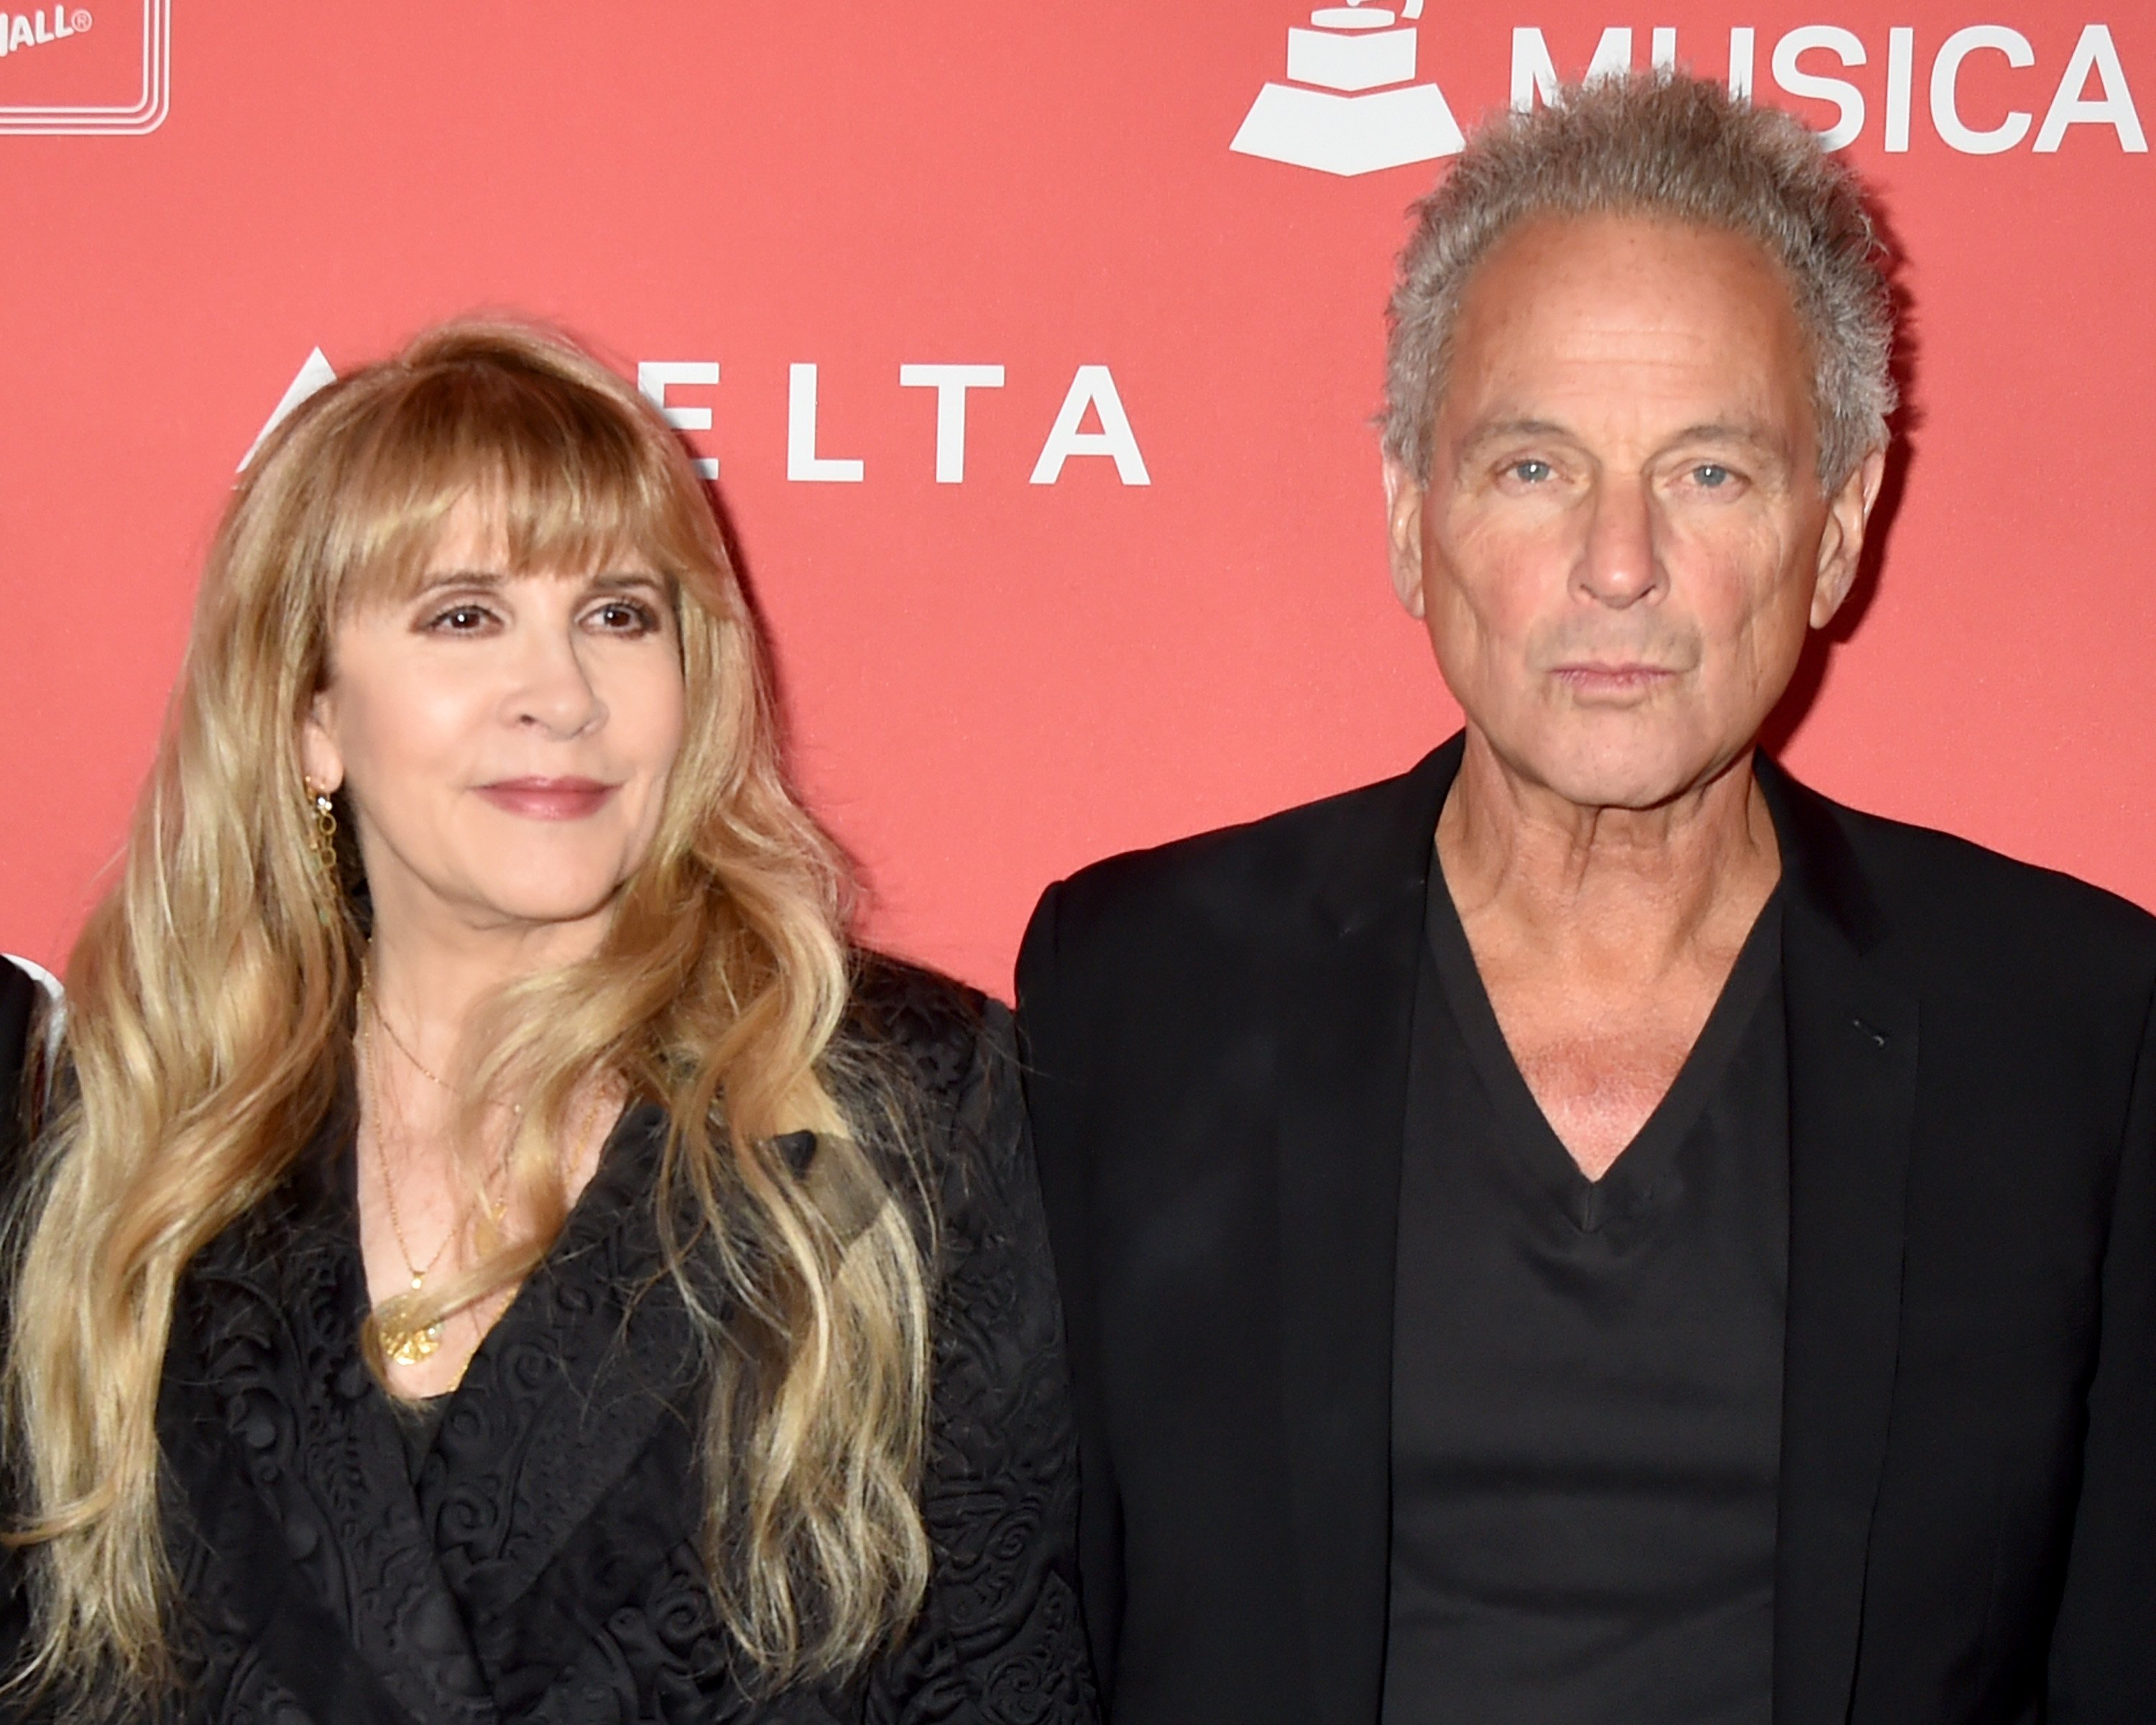 Stevie Nicks wears a black jacket and Lindsey Buckingham wears a black shirt. They stand in front of a red background.